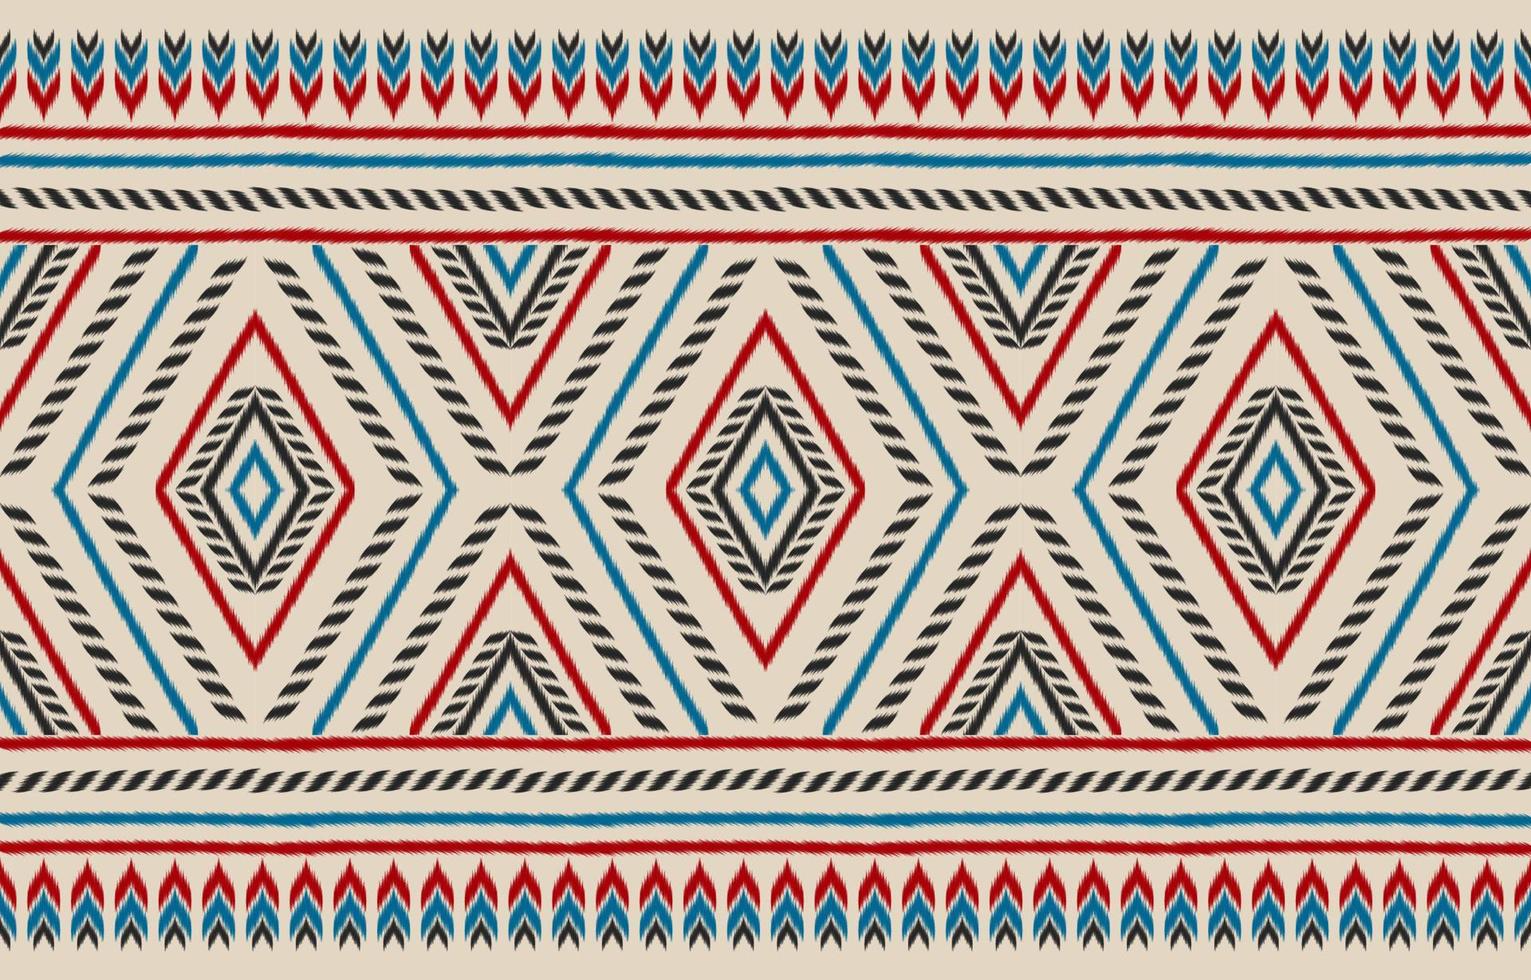 Carpet ethnic tribal pattern art. Ethnic ikat seamless pattern traditional. Indian style. vector